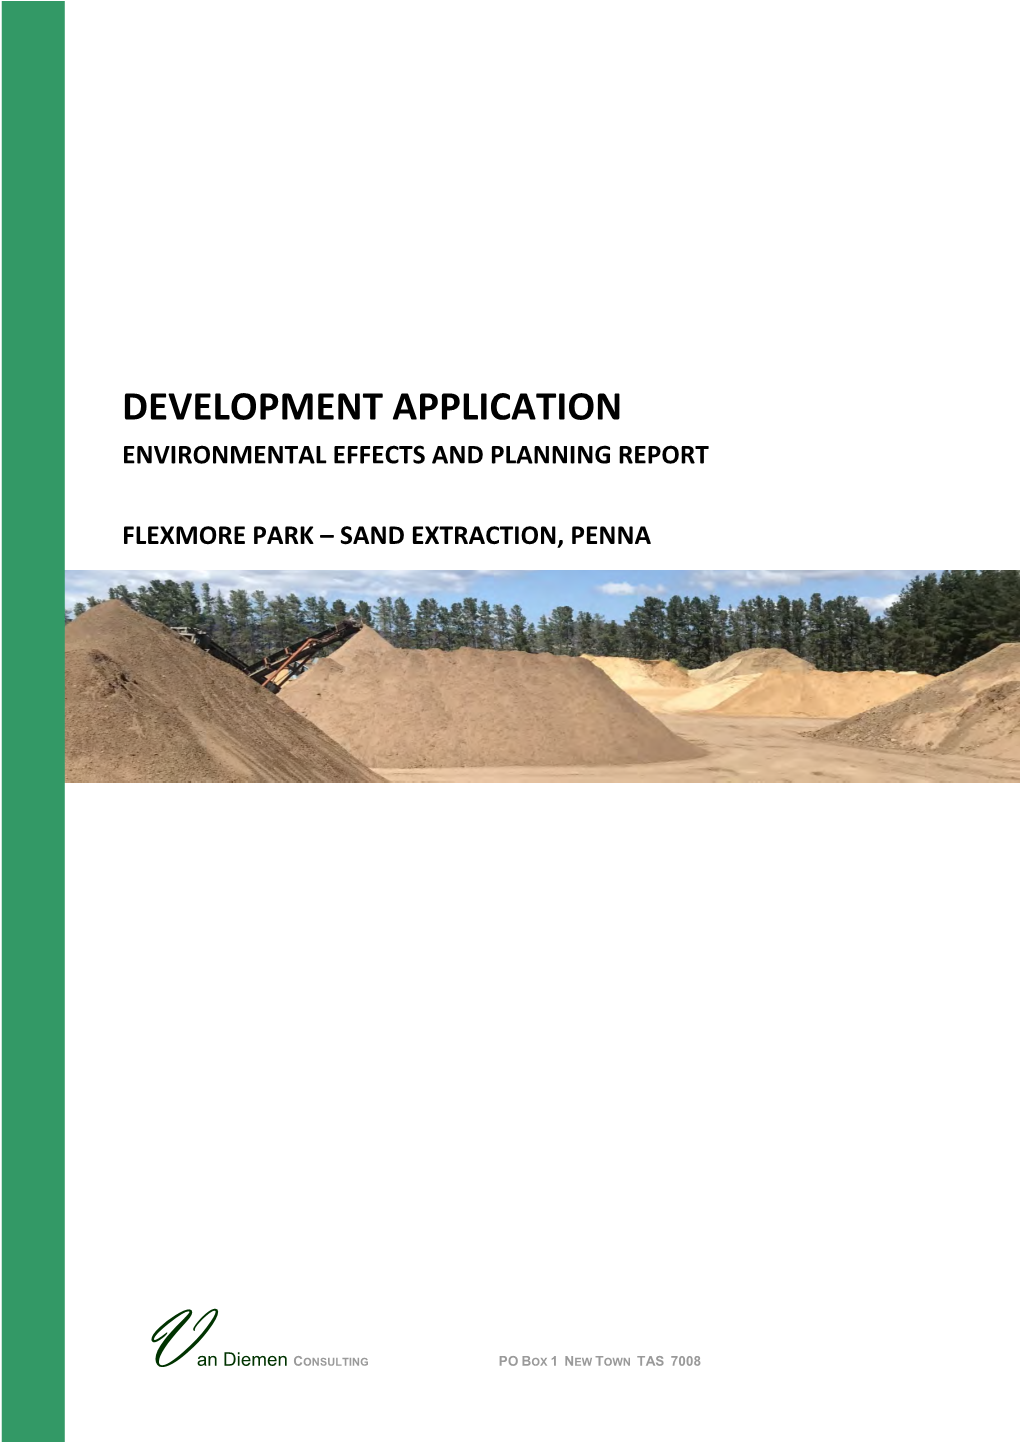 Development Application Environmental Effects and Planning Report